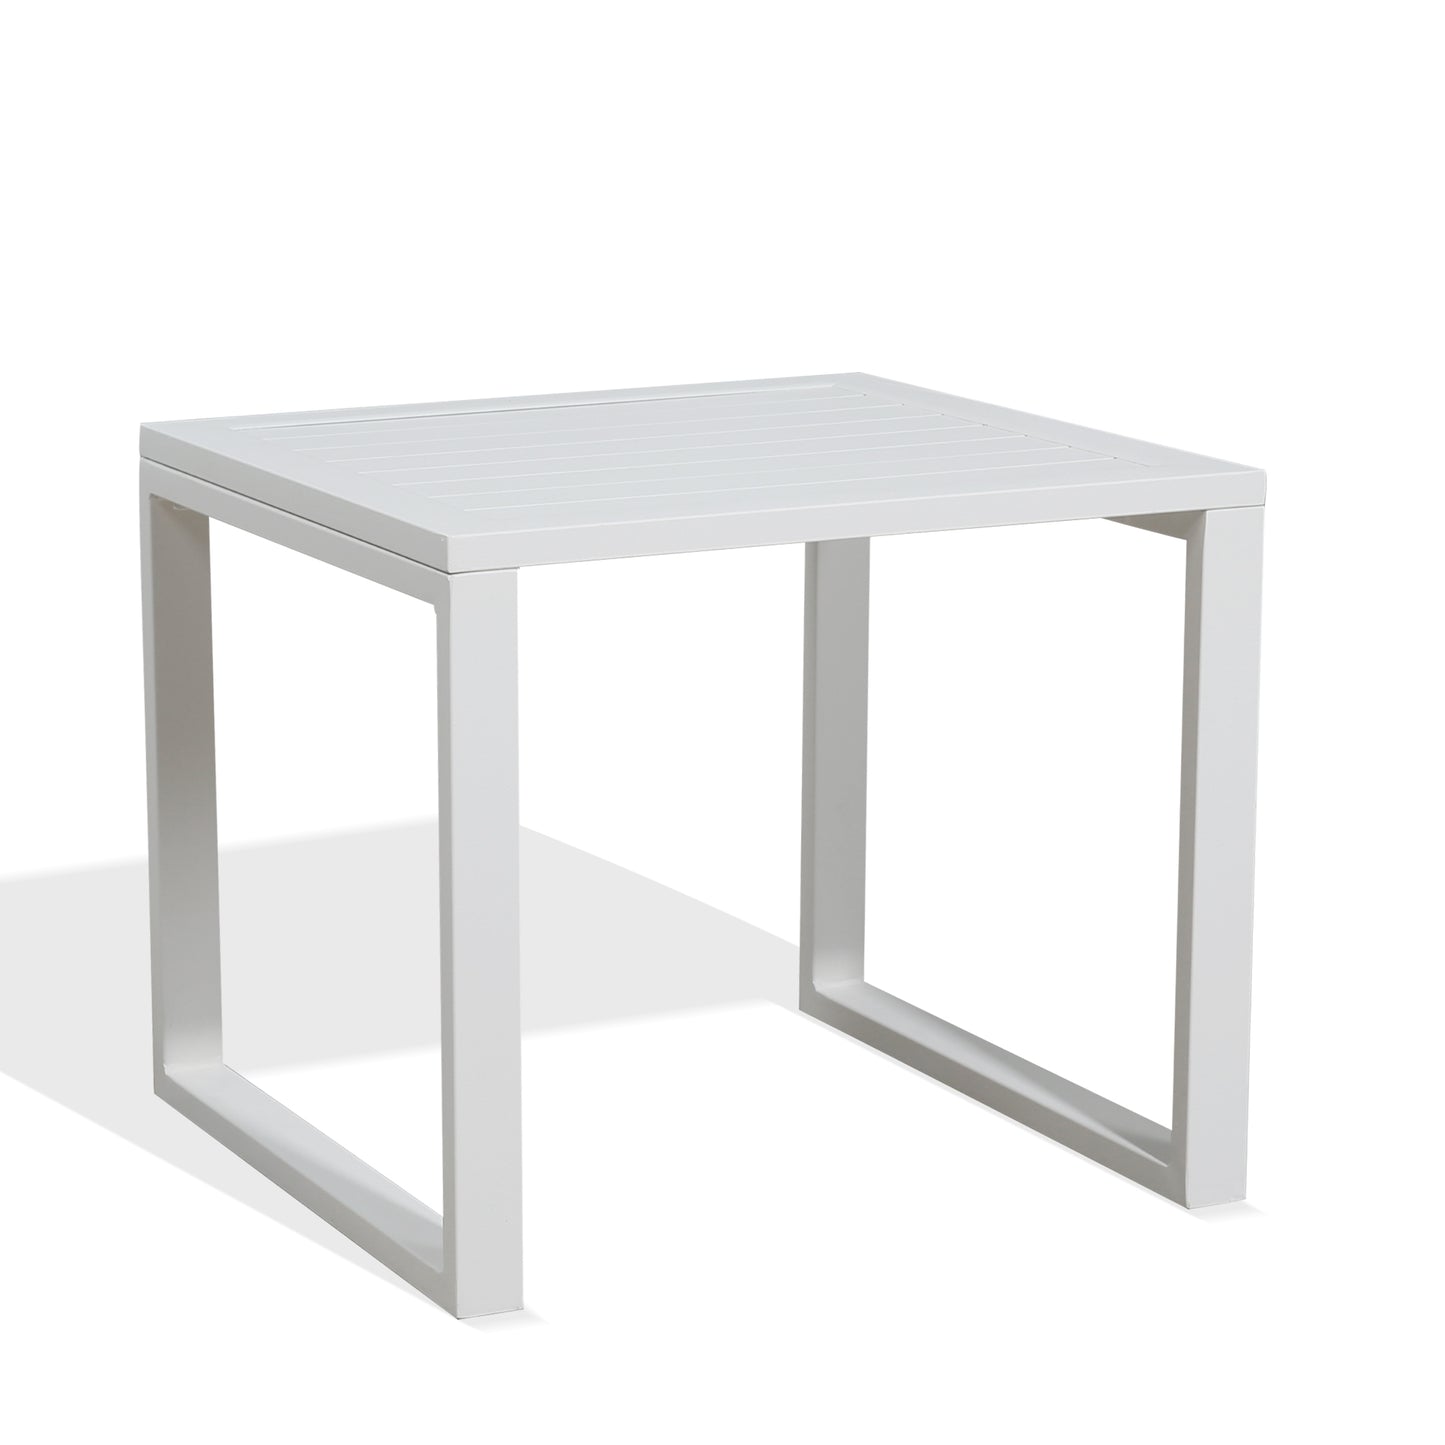 Patio Aluminum Side Table Outdoor Indoor Square End Table, White